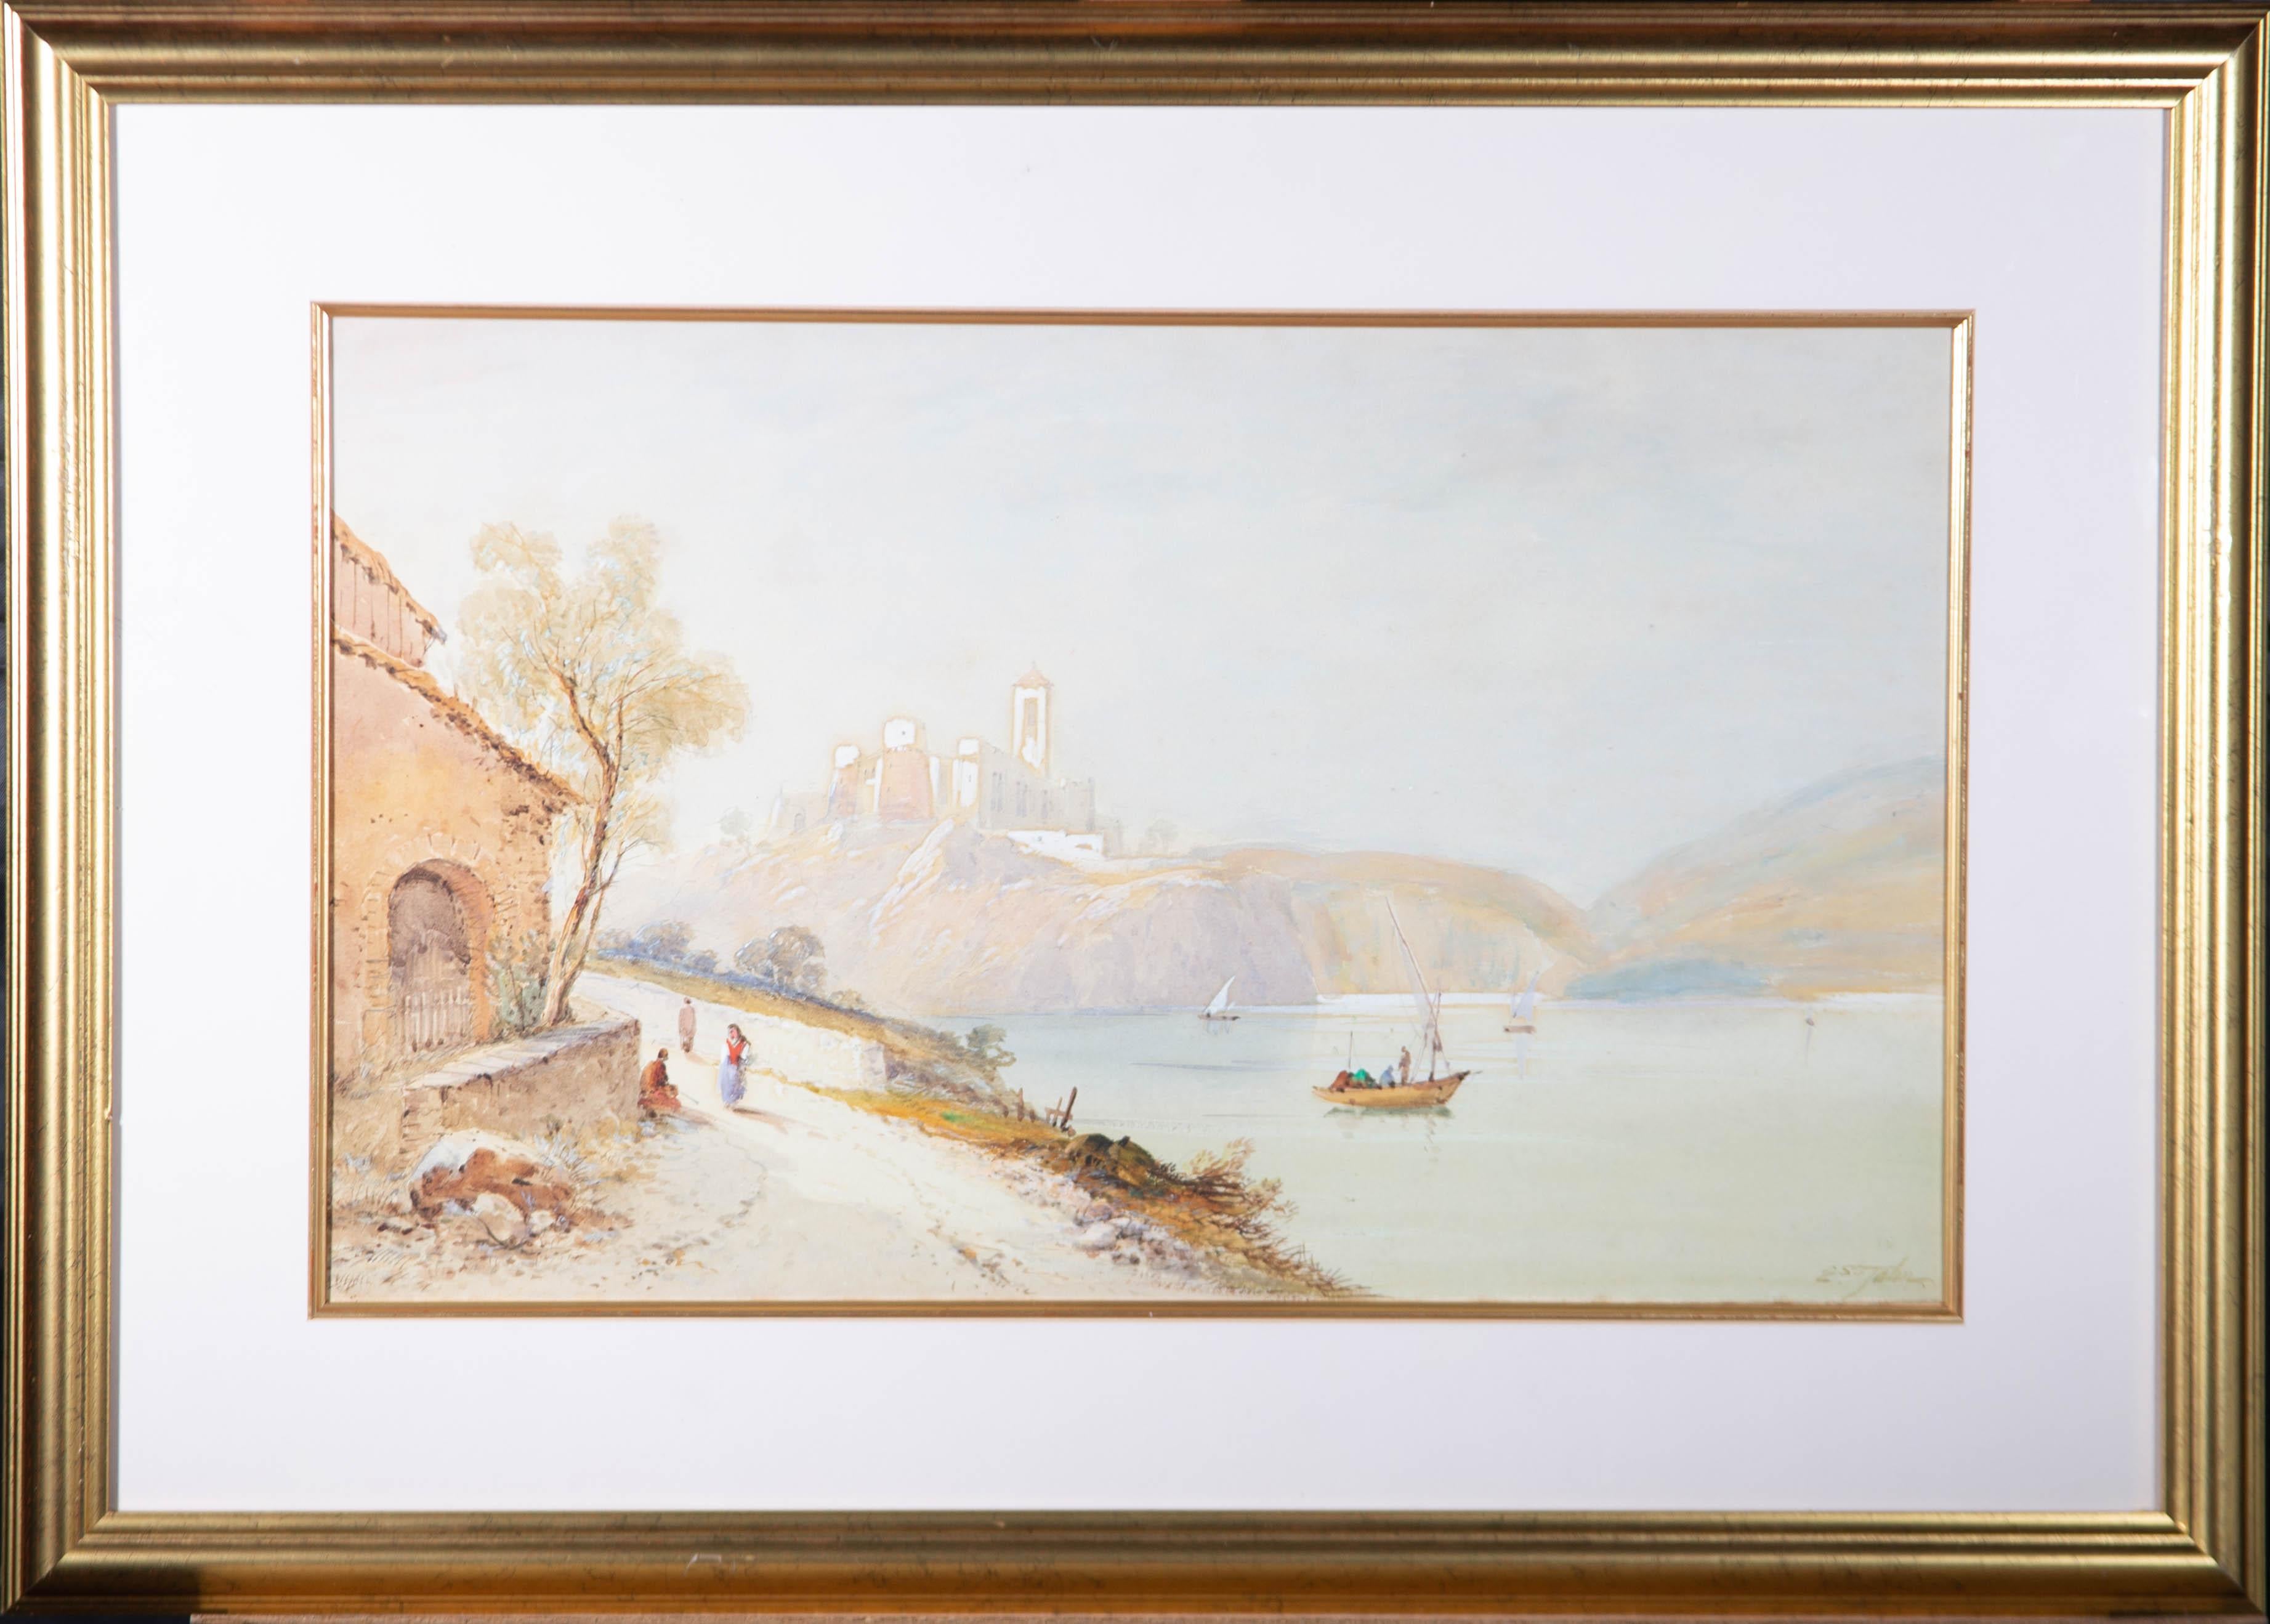 A dramatic landscape depicting a clifftop castle on the Adriatic Sea. Presented glazed in a pale-pink mount with a gilt-effect inner and a distressed gilt-effect wooden frame. Inscribed with the title to the verso of both the painting and mount.